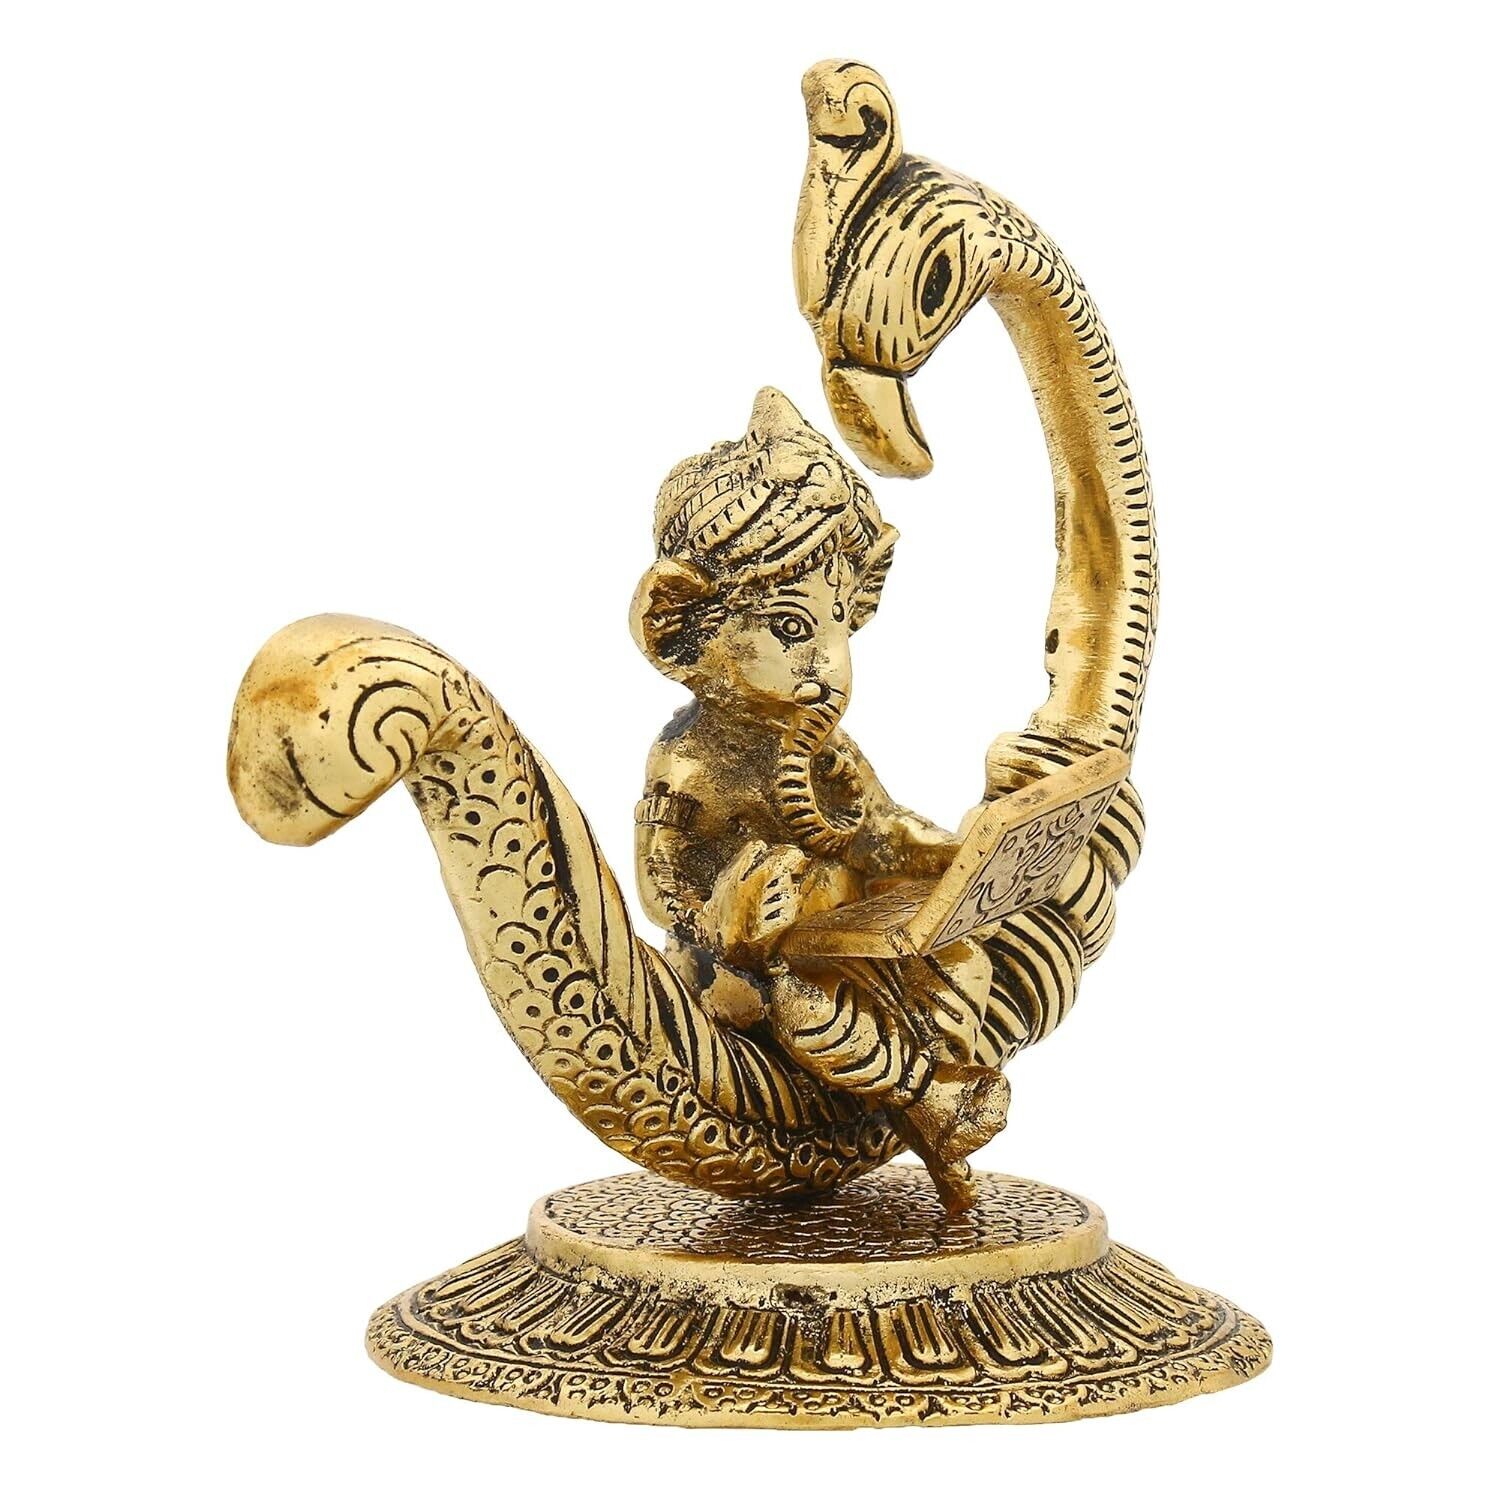 More Than a Stand: Metal Ganesh Laptop Decor - Luck, Fun & Functionality for You